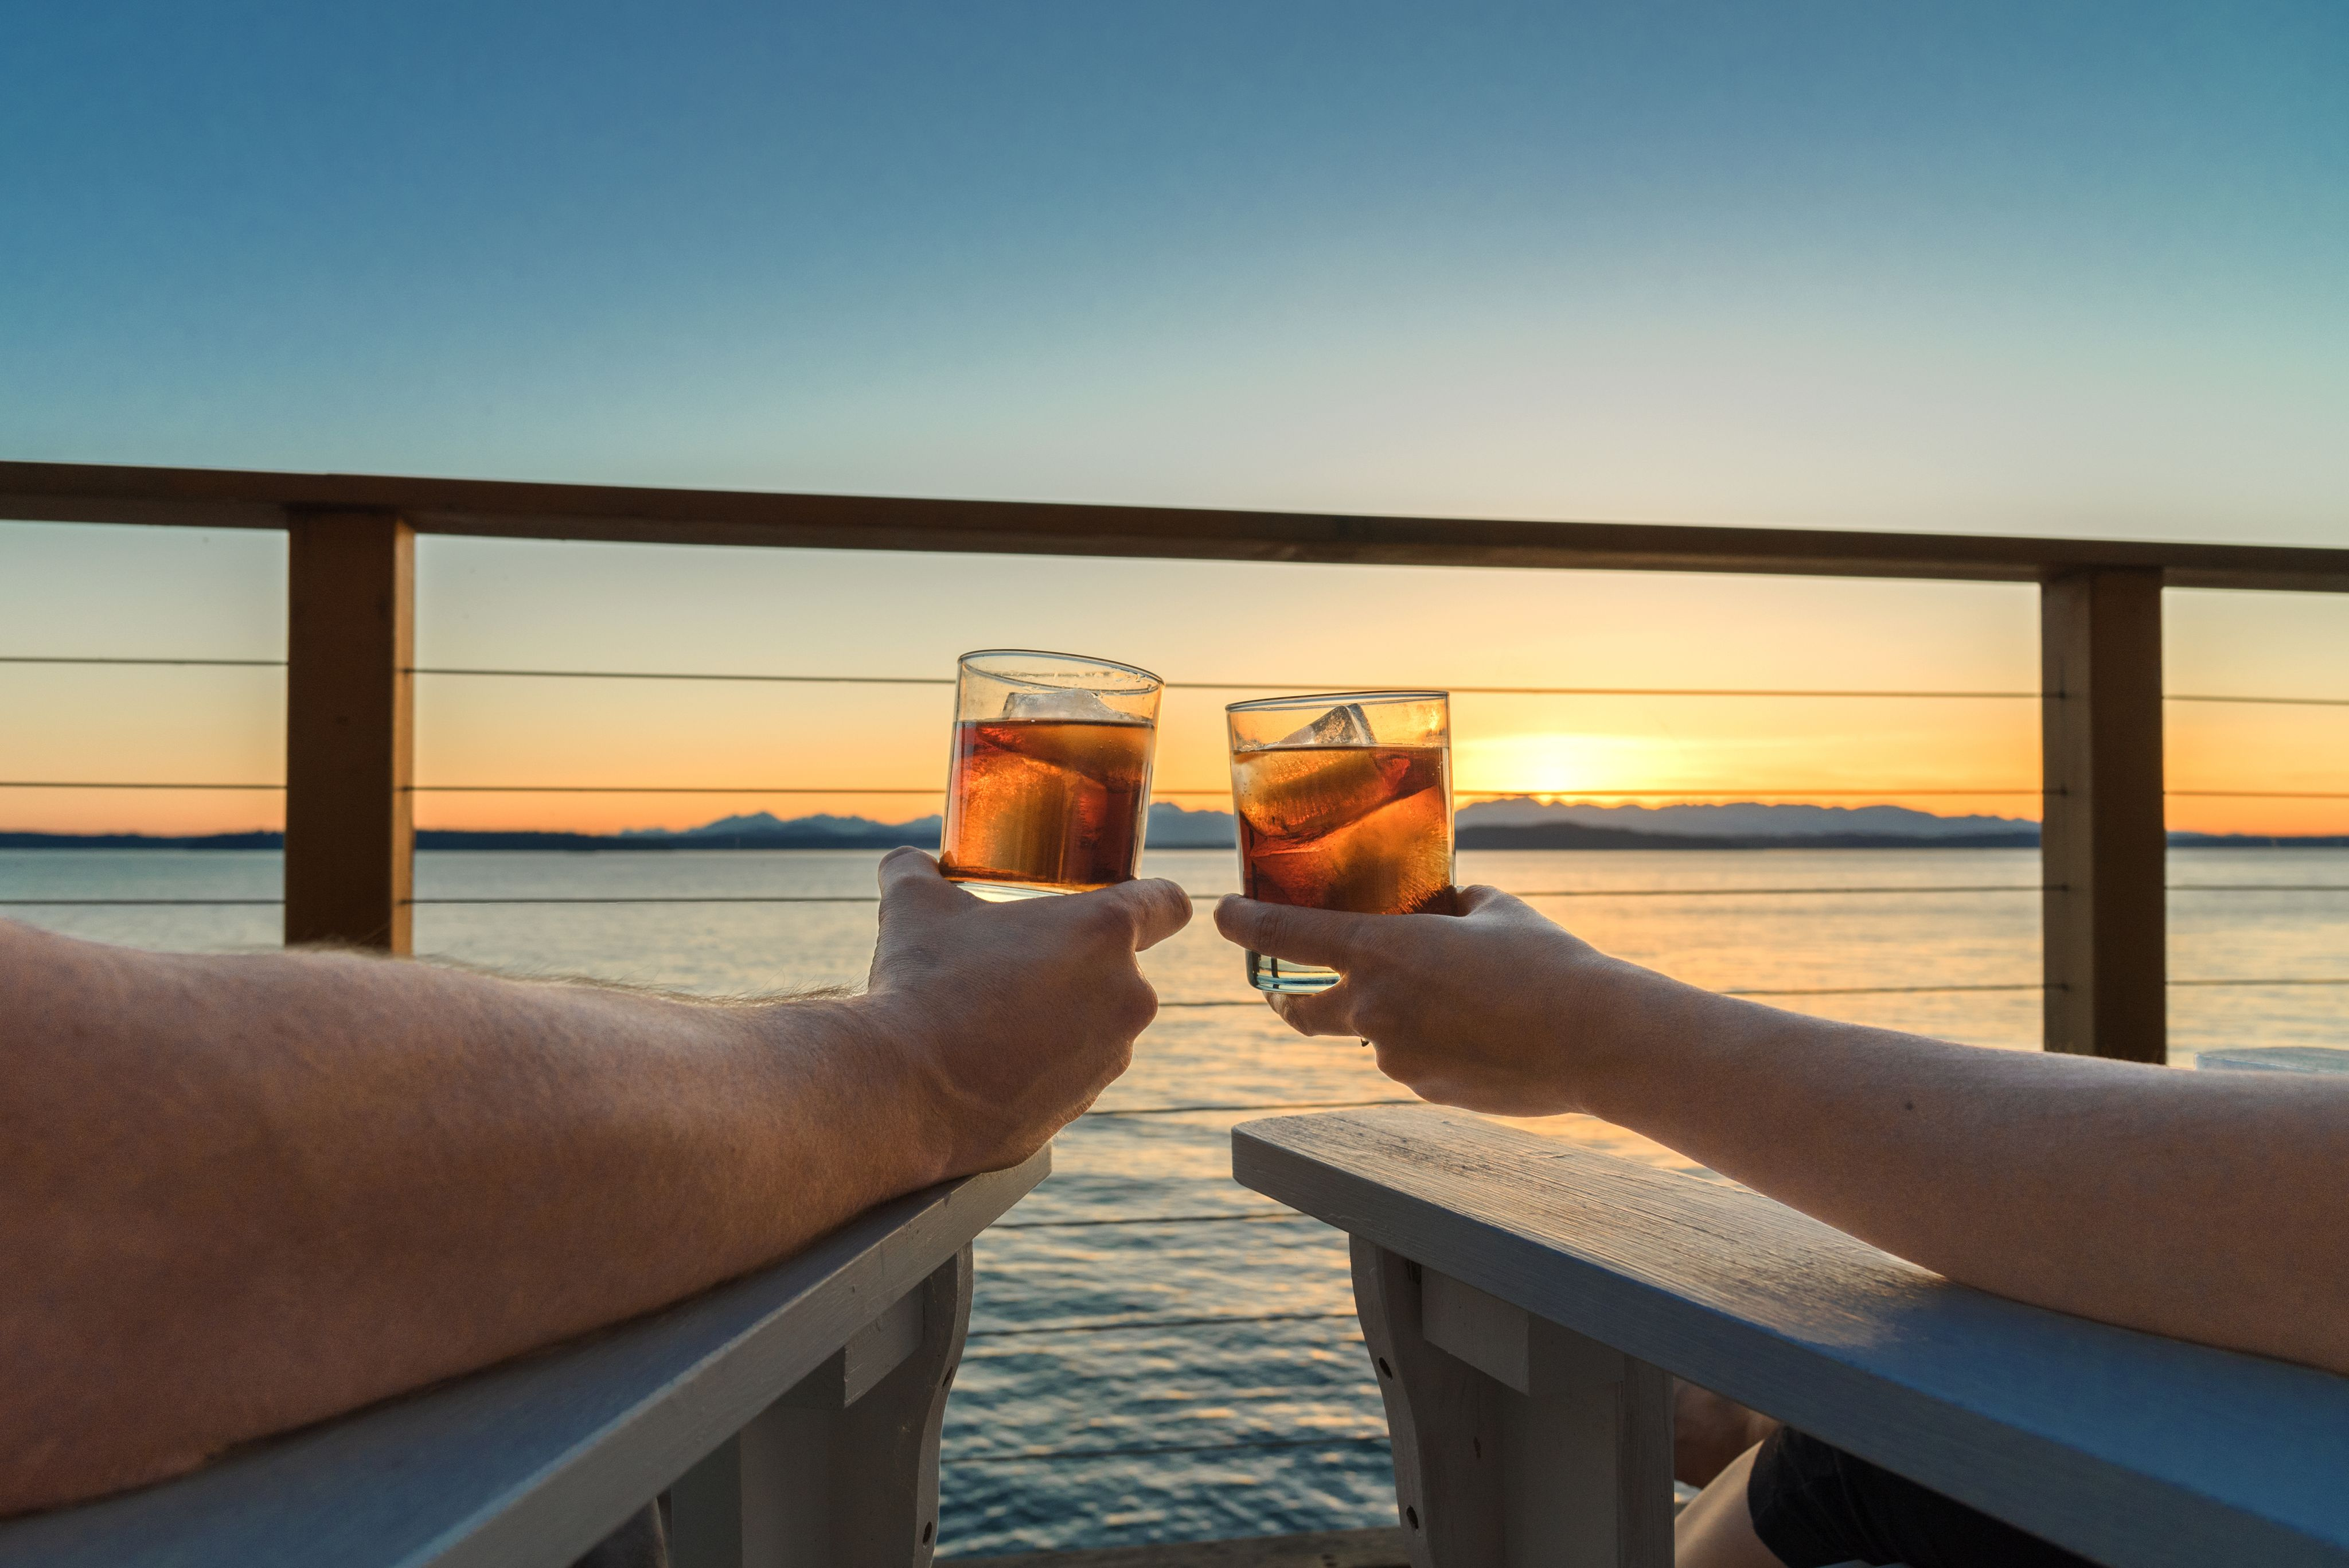 Beautiful sunset view from the deck, couple holding up glasses to toast.